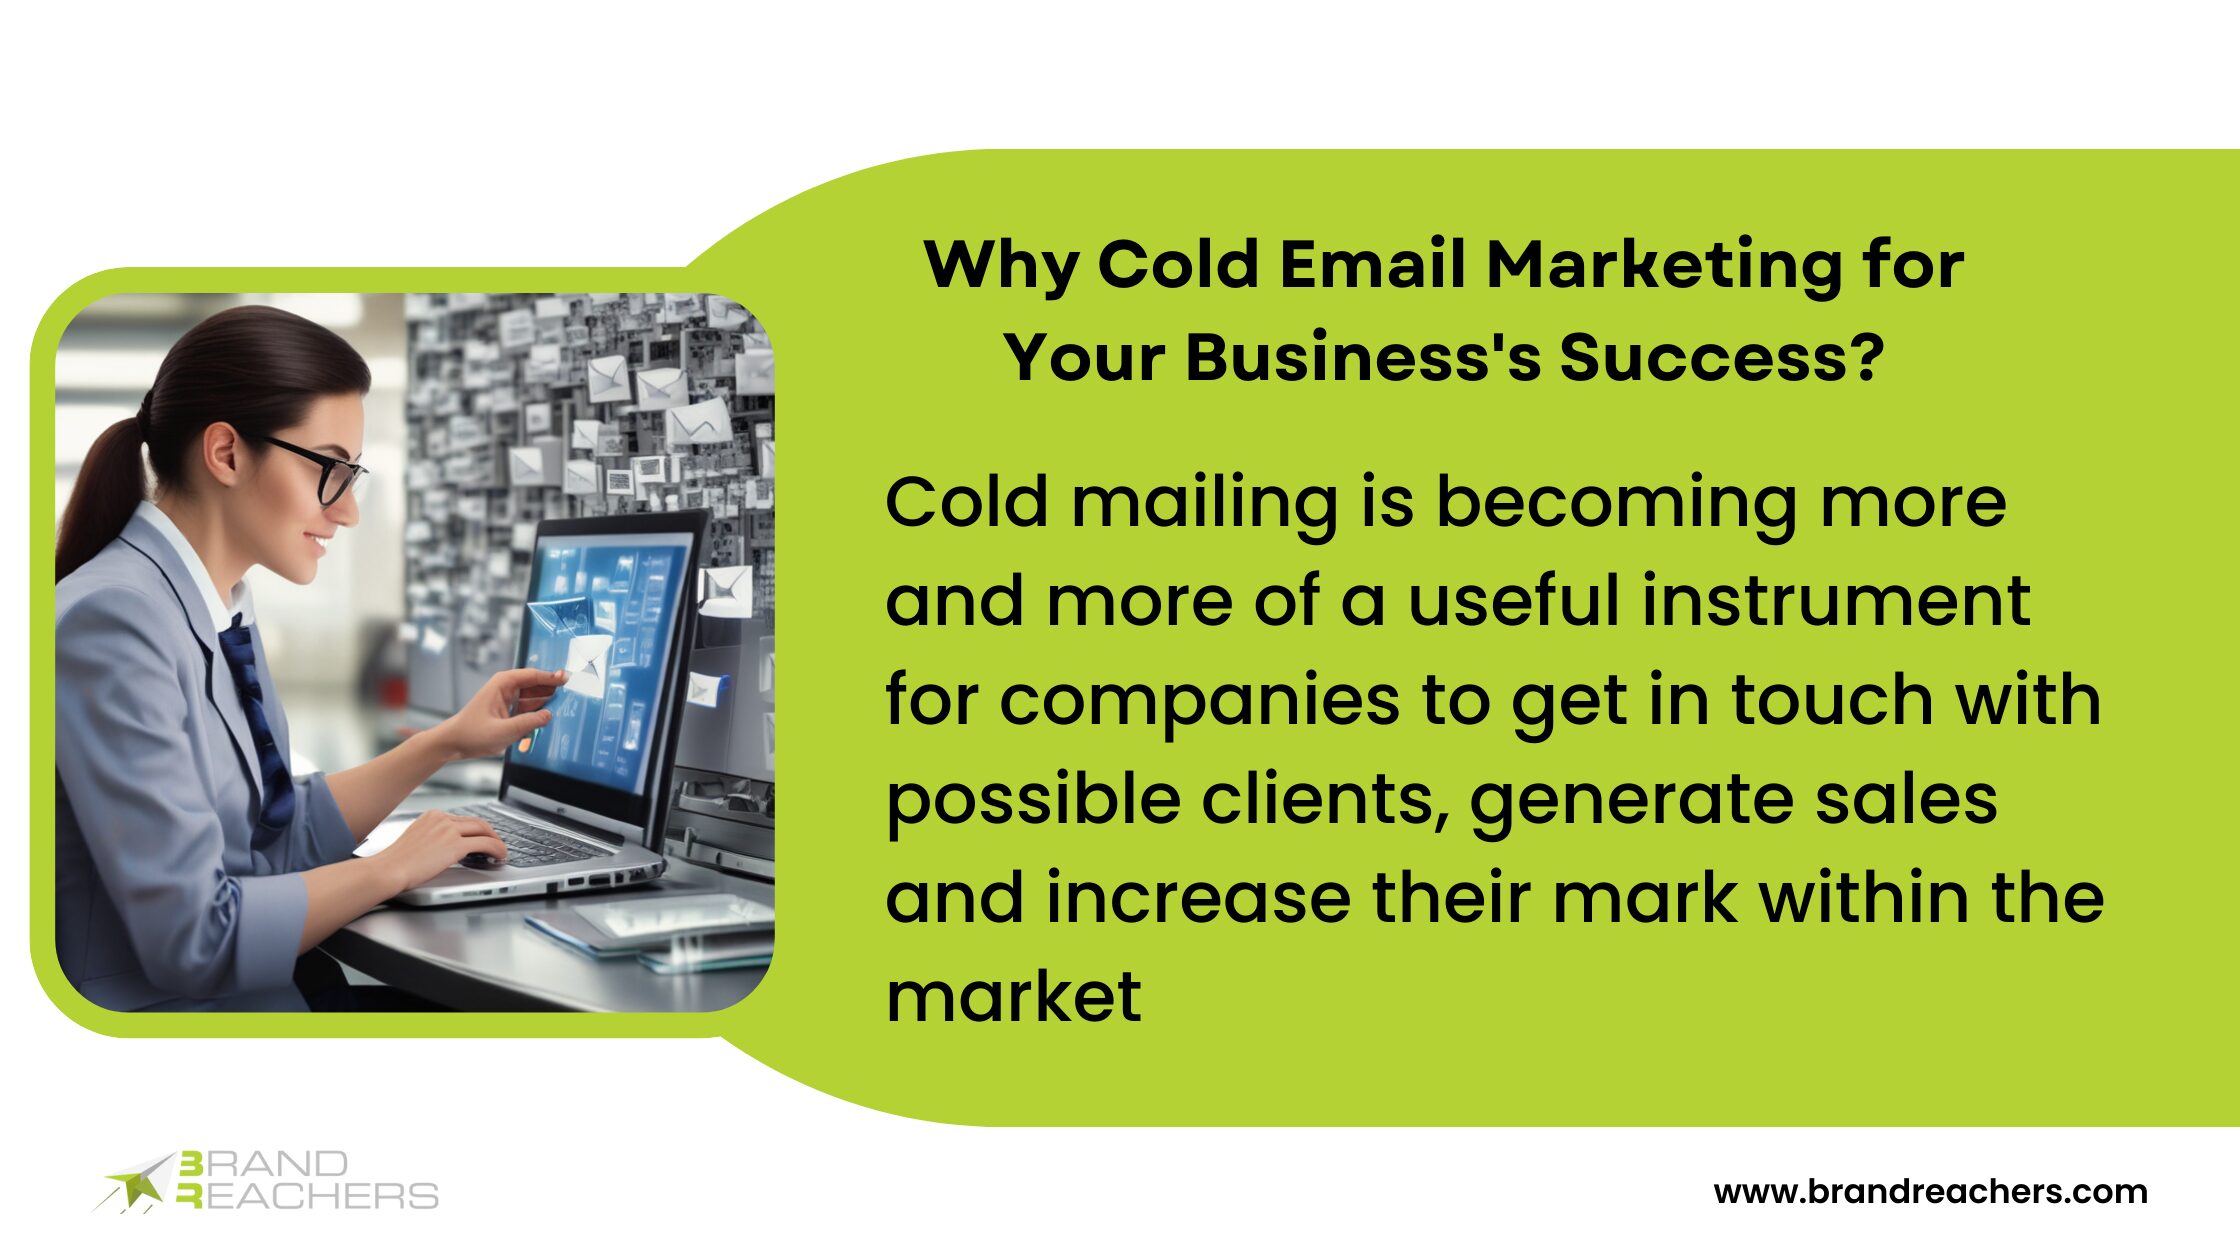 cold mailing is becoming more and more of a useful instrument for companies to get in touch with possible clients, generate sales and increase their mark within the market.